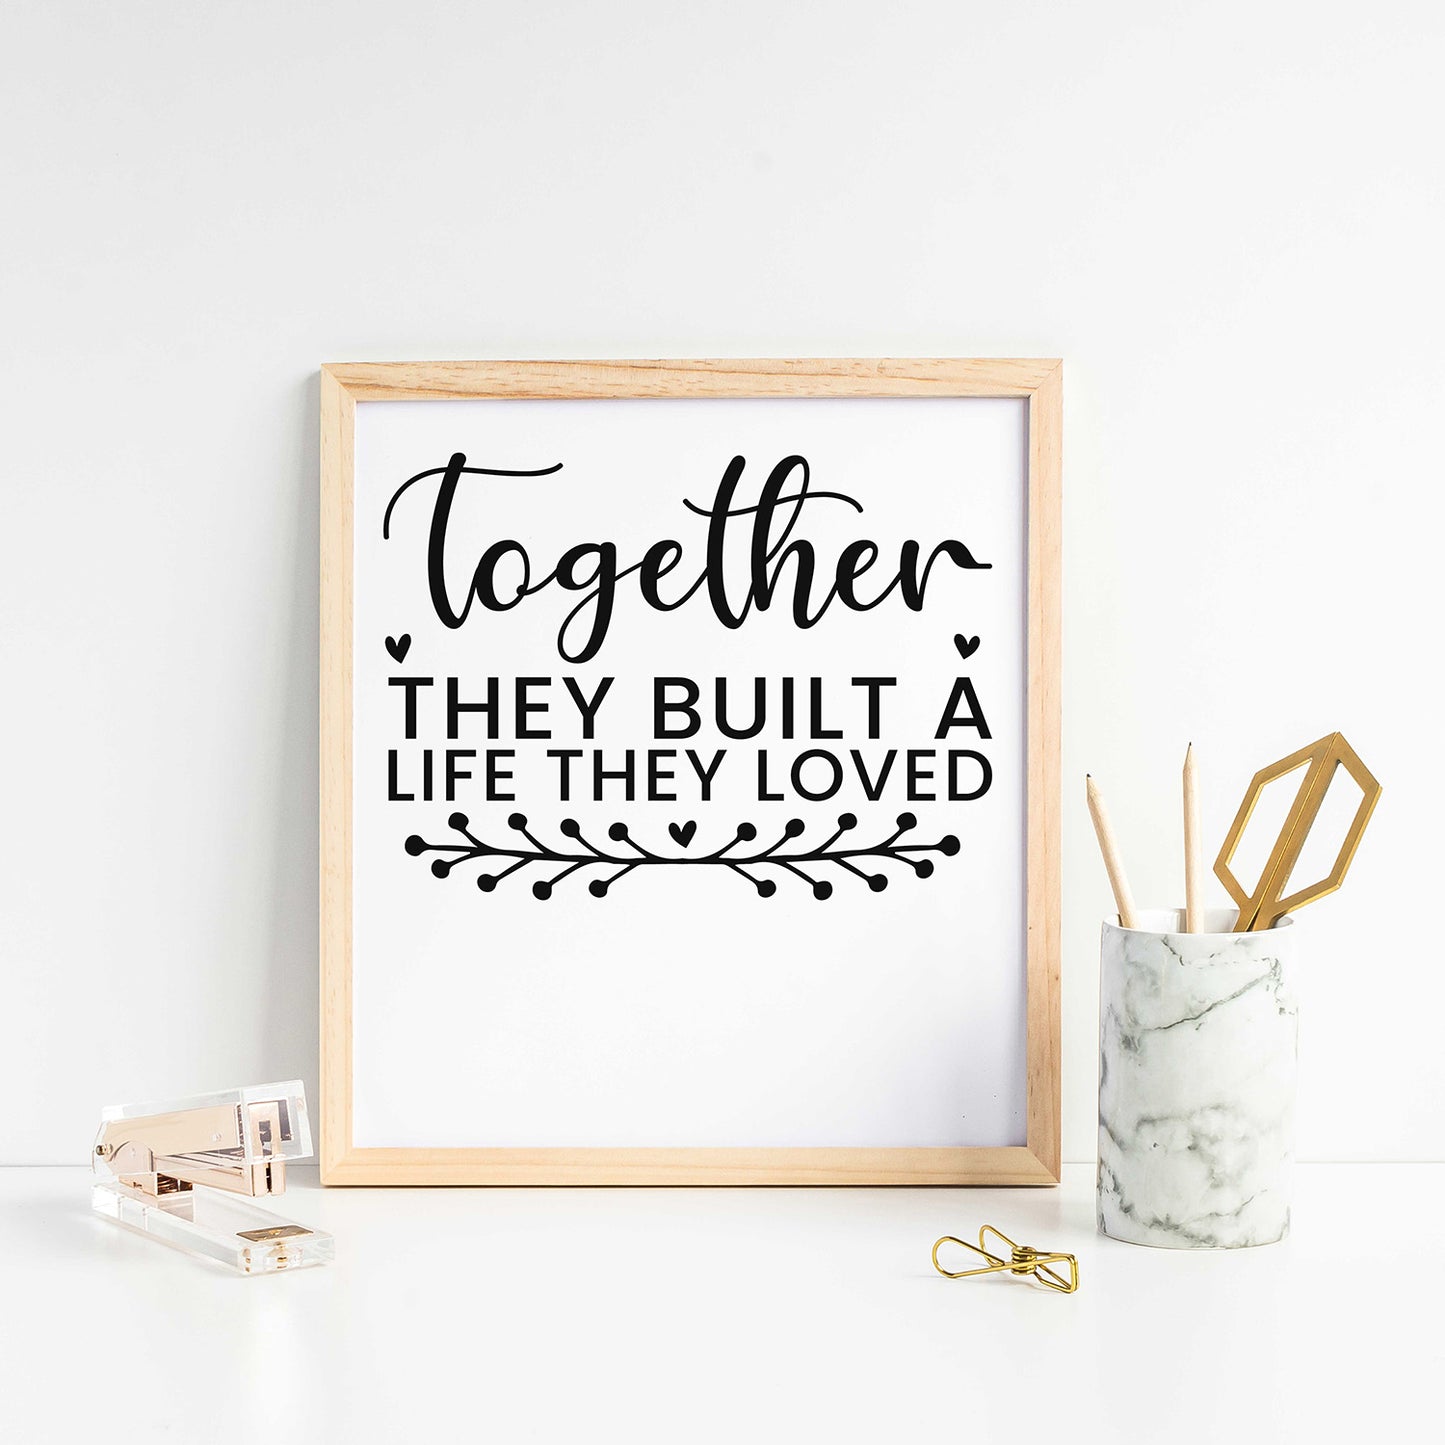 "Together They Built A Life They Loved" Graphic